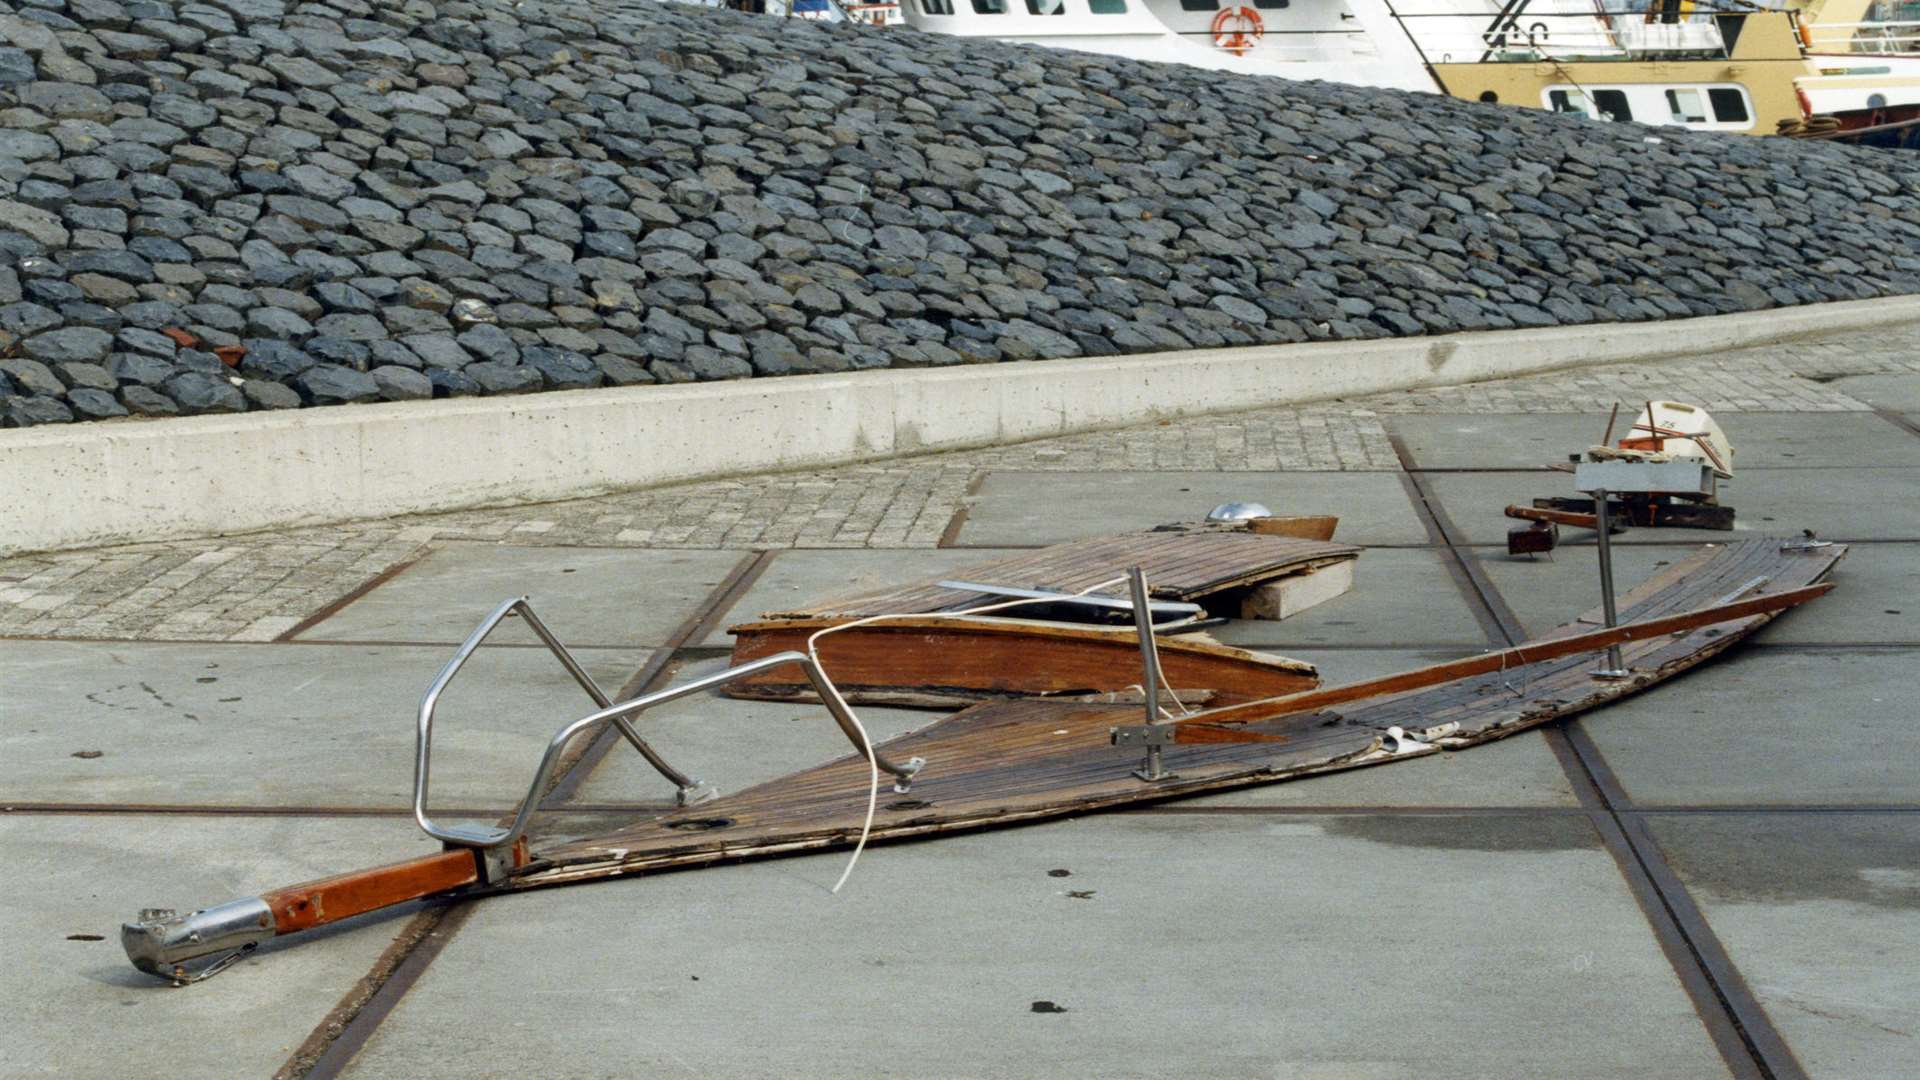 Parts of the wooden boat found in Holland